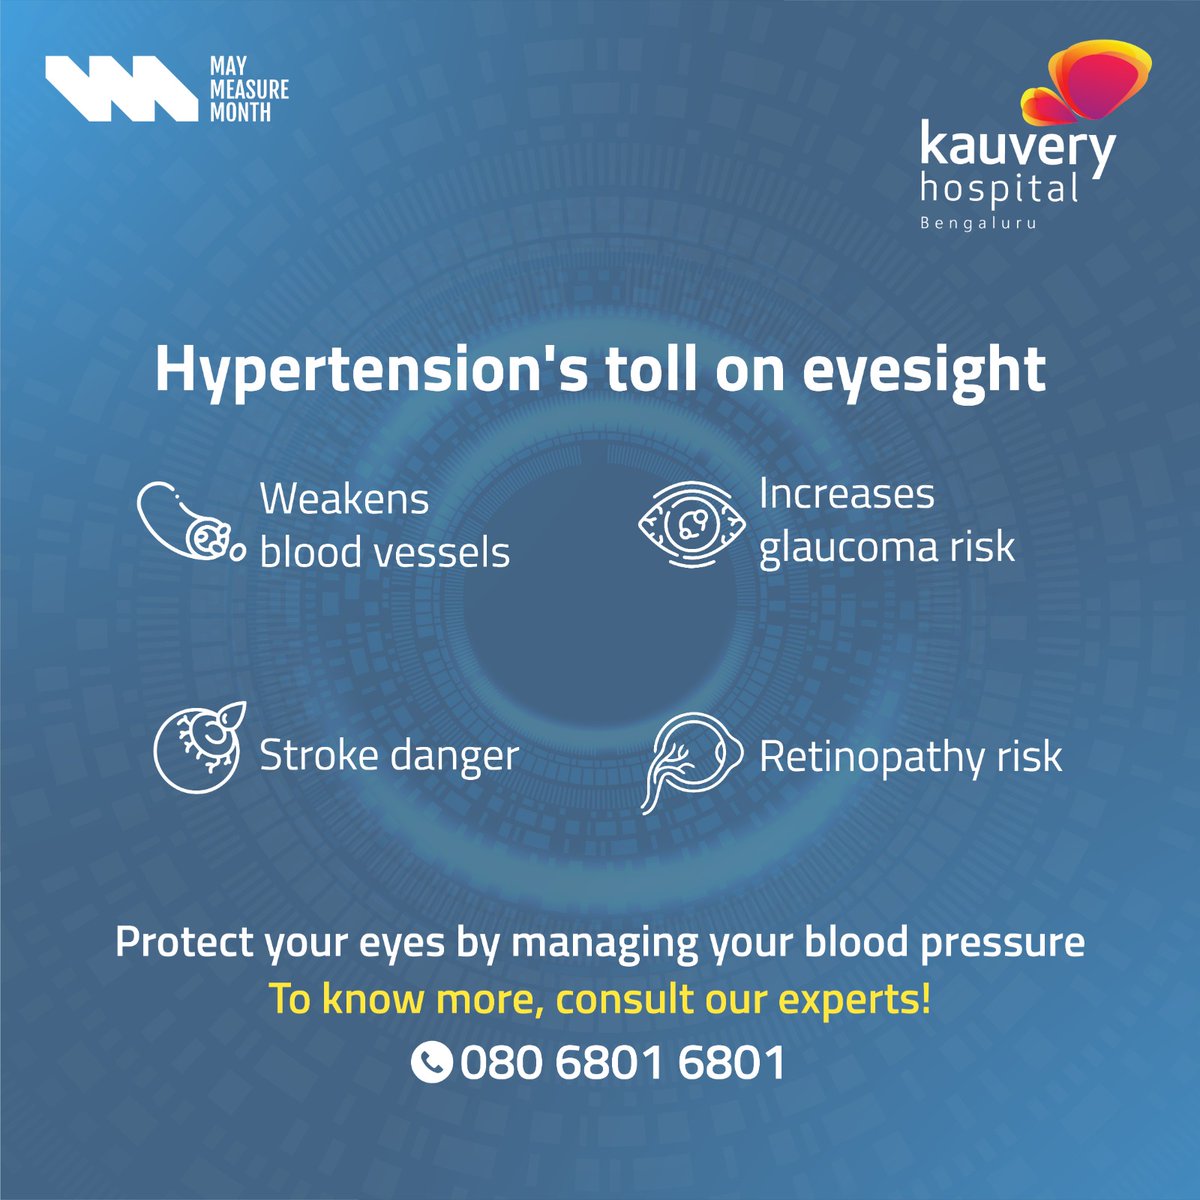 Silent but serious - Hypertension can damage your vision without you even noticing. Protect your #eyes by getting your blood pressure under control.

This #MayMeasureMonth, learn more about the connection between blood pressure and eyes.

#kauveryhospitals #hypertensionawareness